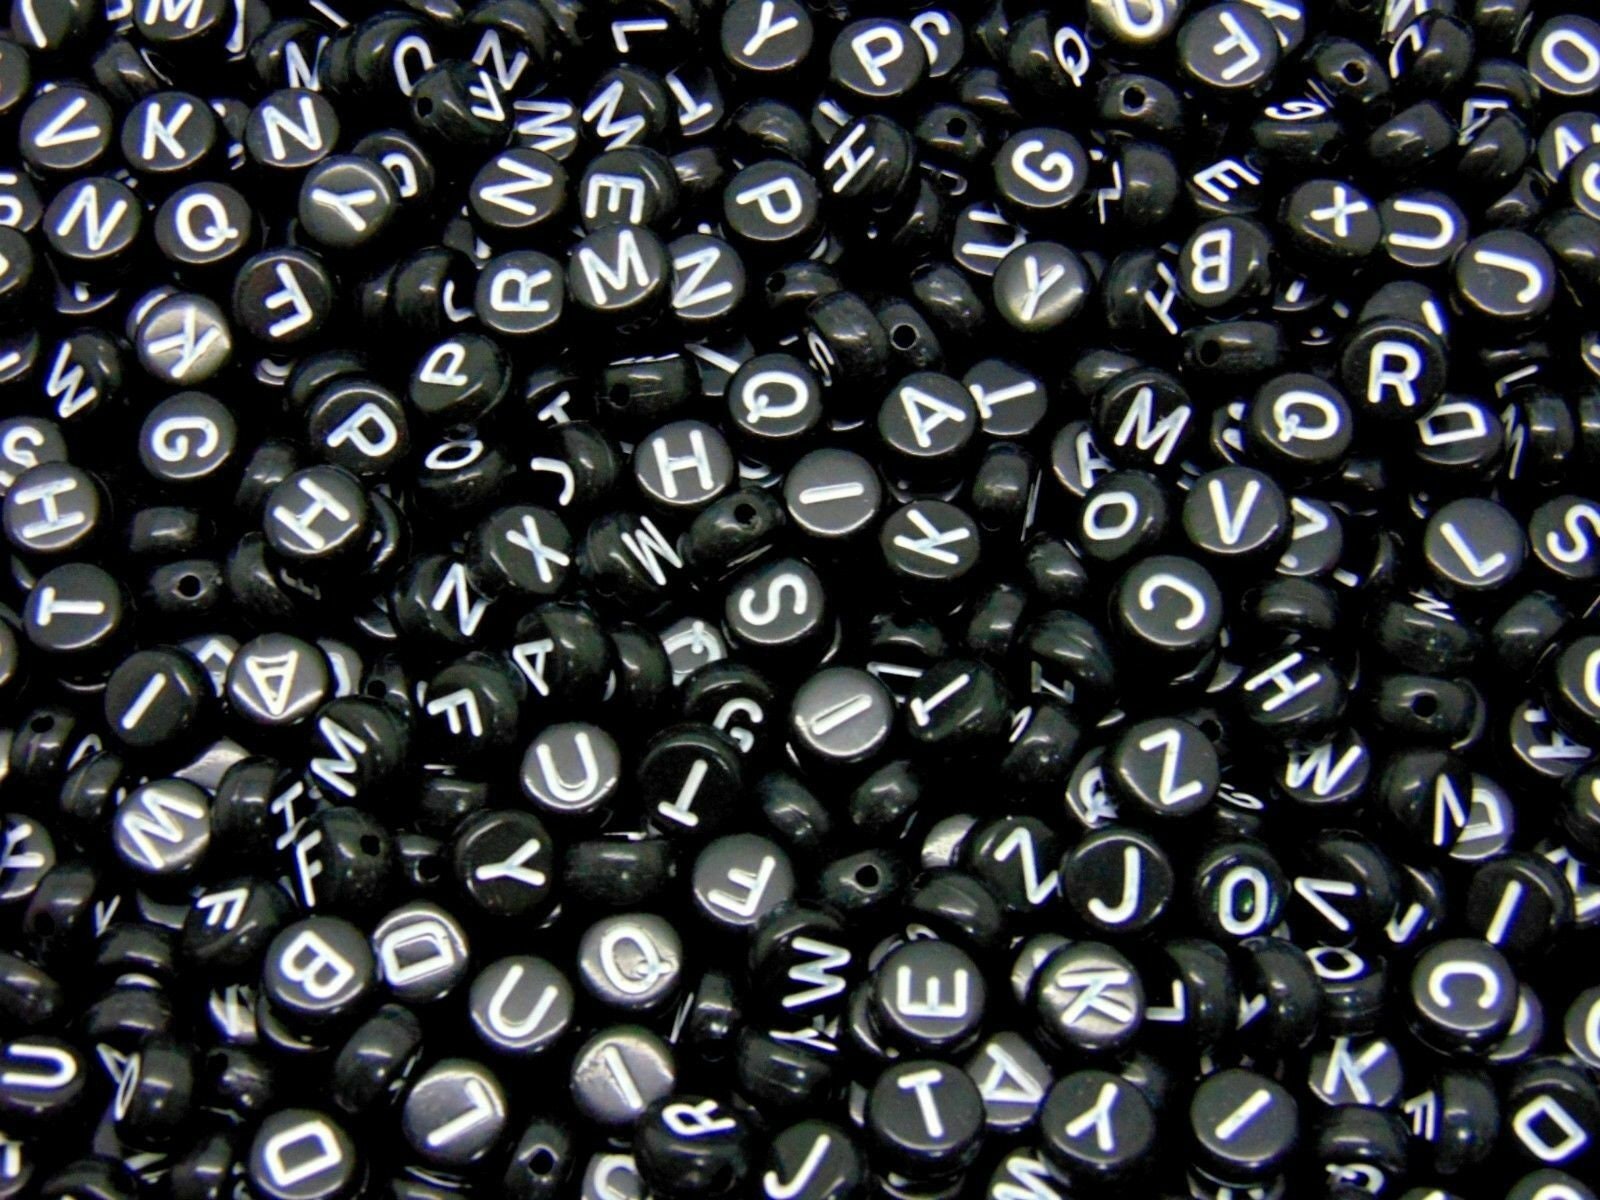 Black Enamel Cube Initial Alphabet Beads for Bracelets and Jewelry Making 6x6mm